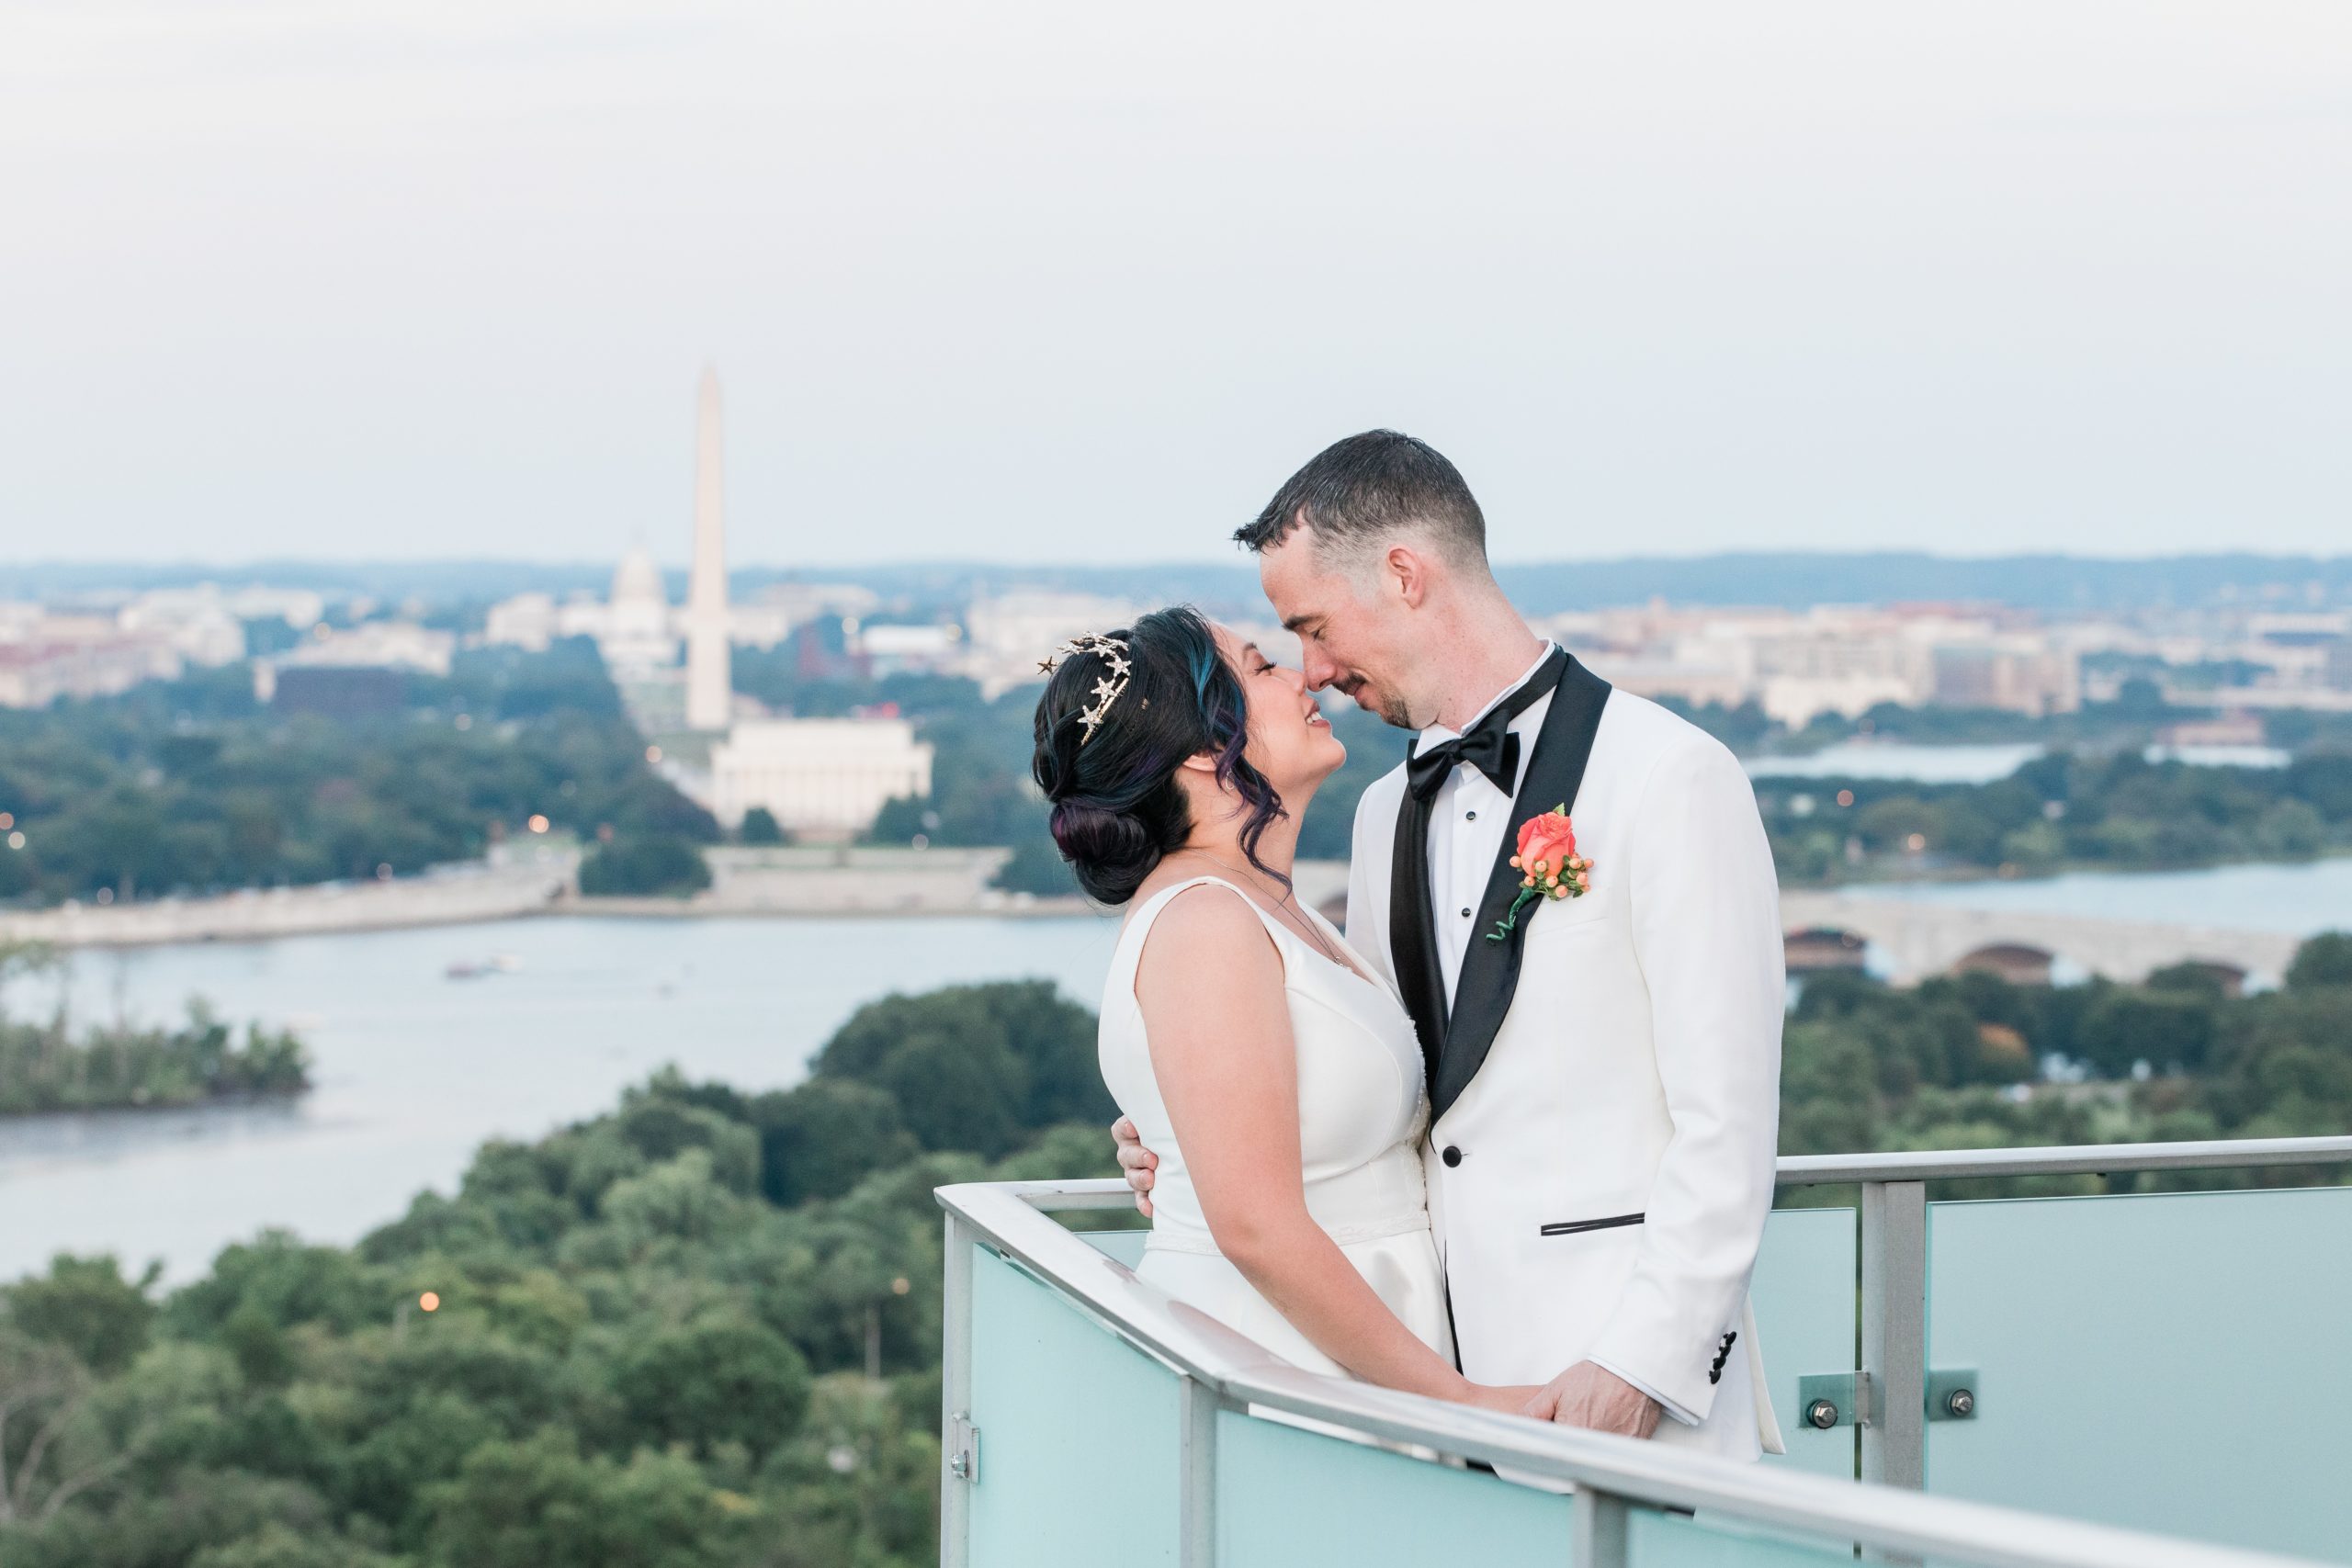 A groom in a white tuxedo jacket kisses his bride who is in a white satin ballgown. They are on a rooftop looking over the Potomac River, Lincoln memorial, Washington Monument and Capitol Building